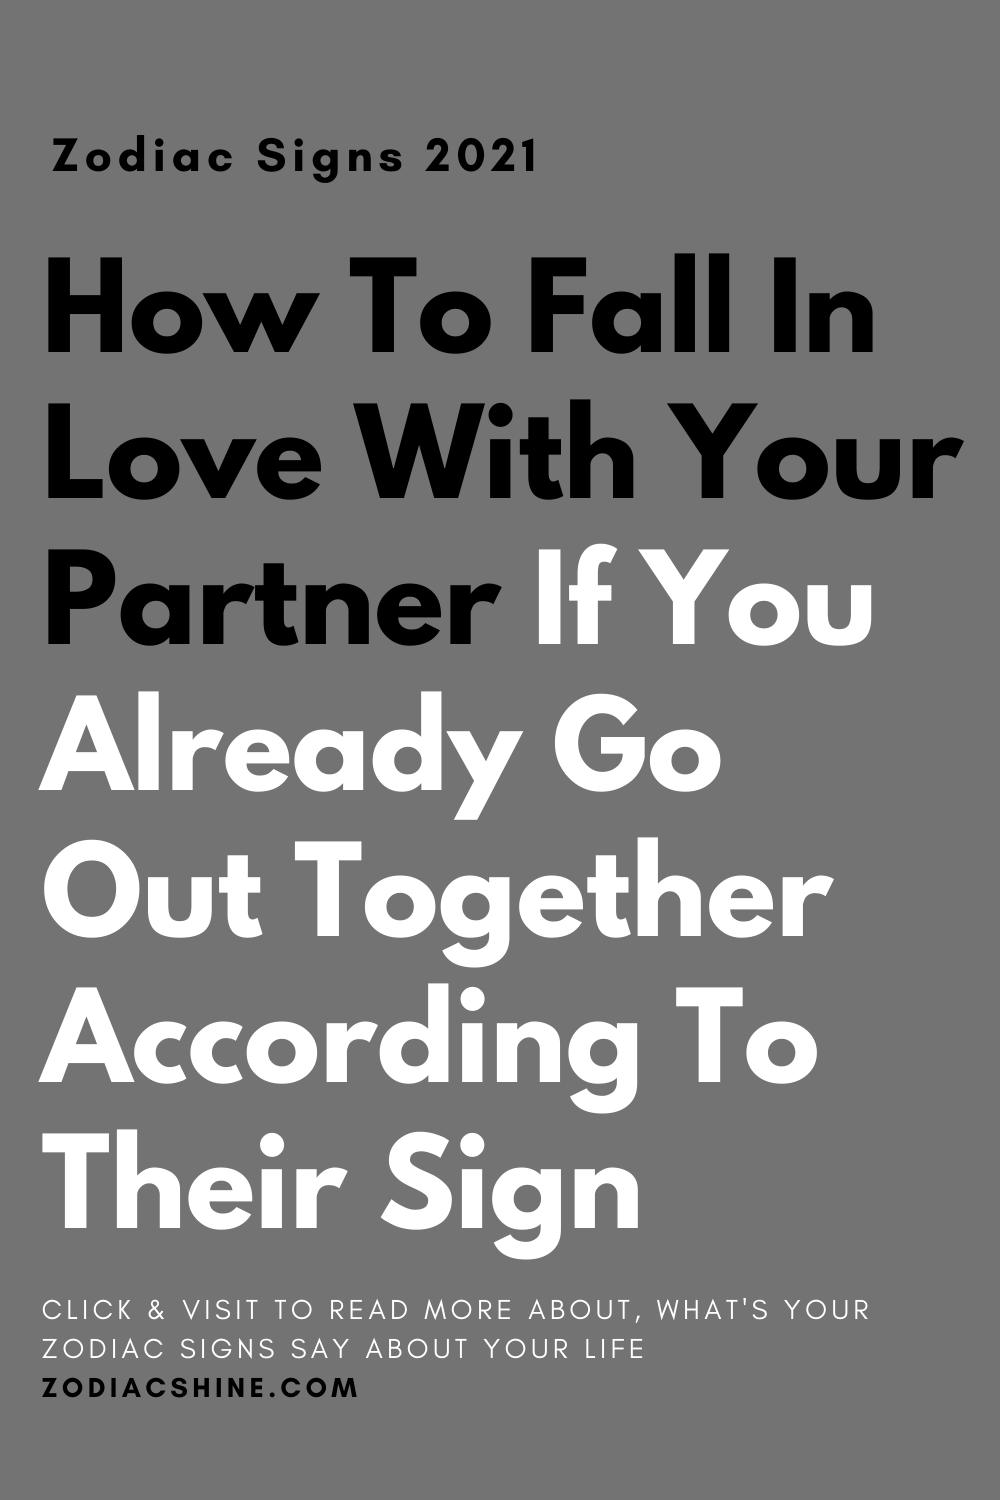 How To Fall In Love With Your Partner If You Already Go Out Together According To Their Sign